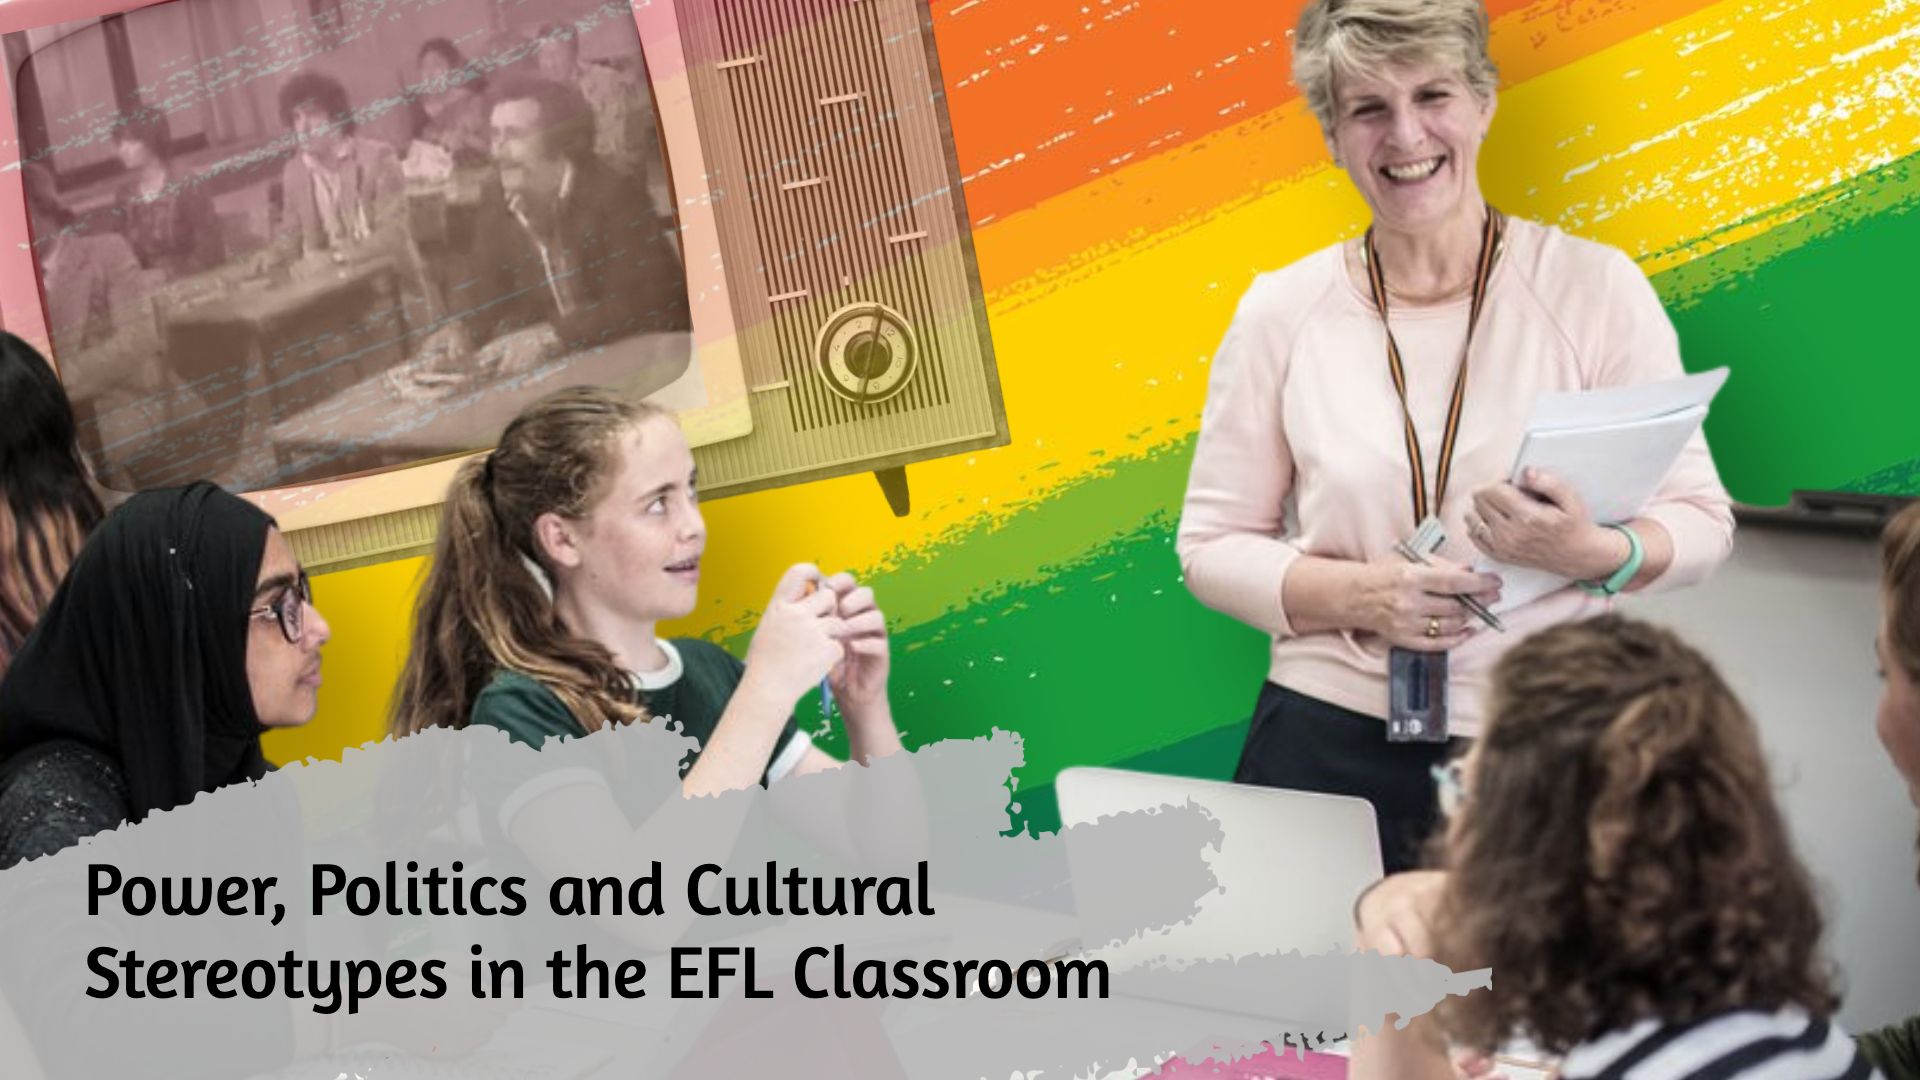 Power, Politics and Cultural Stereotypes in the EFL Classroom